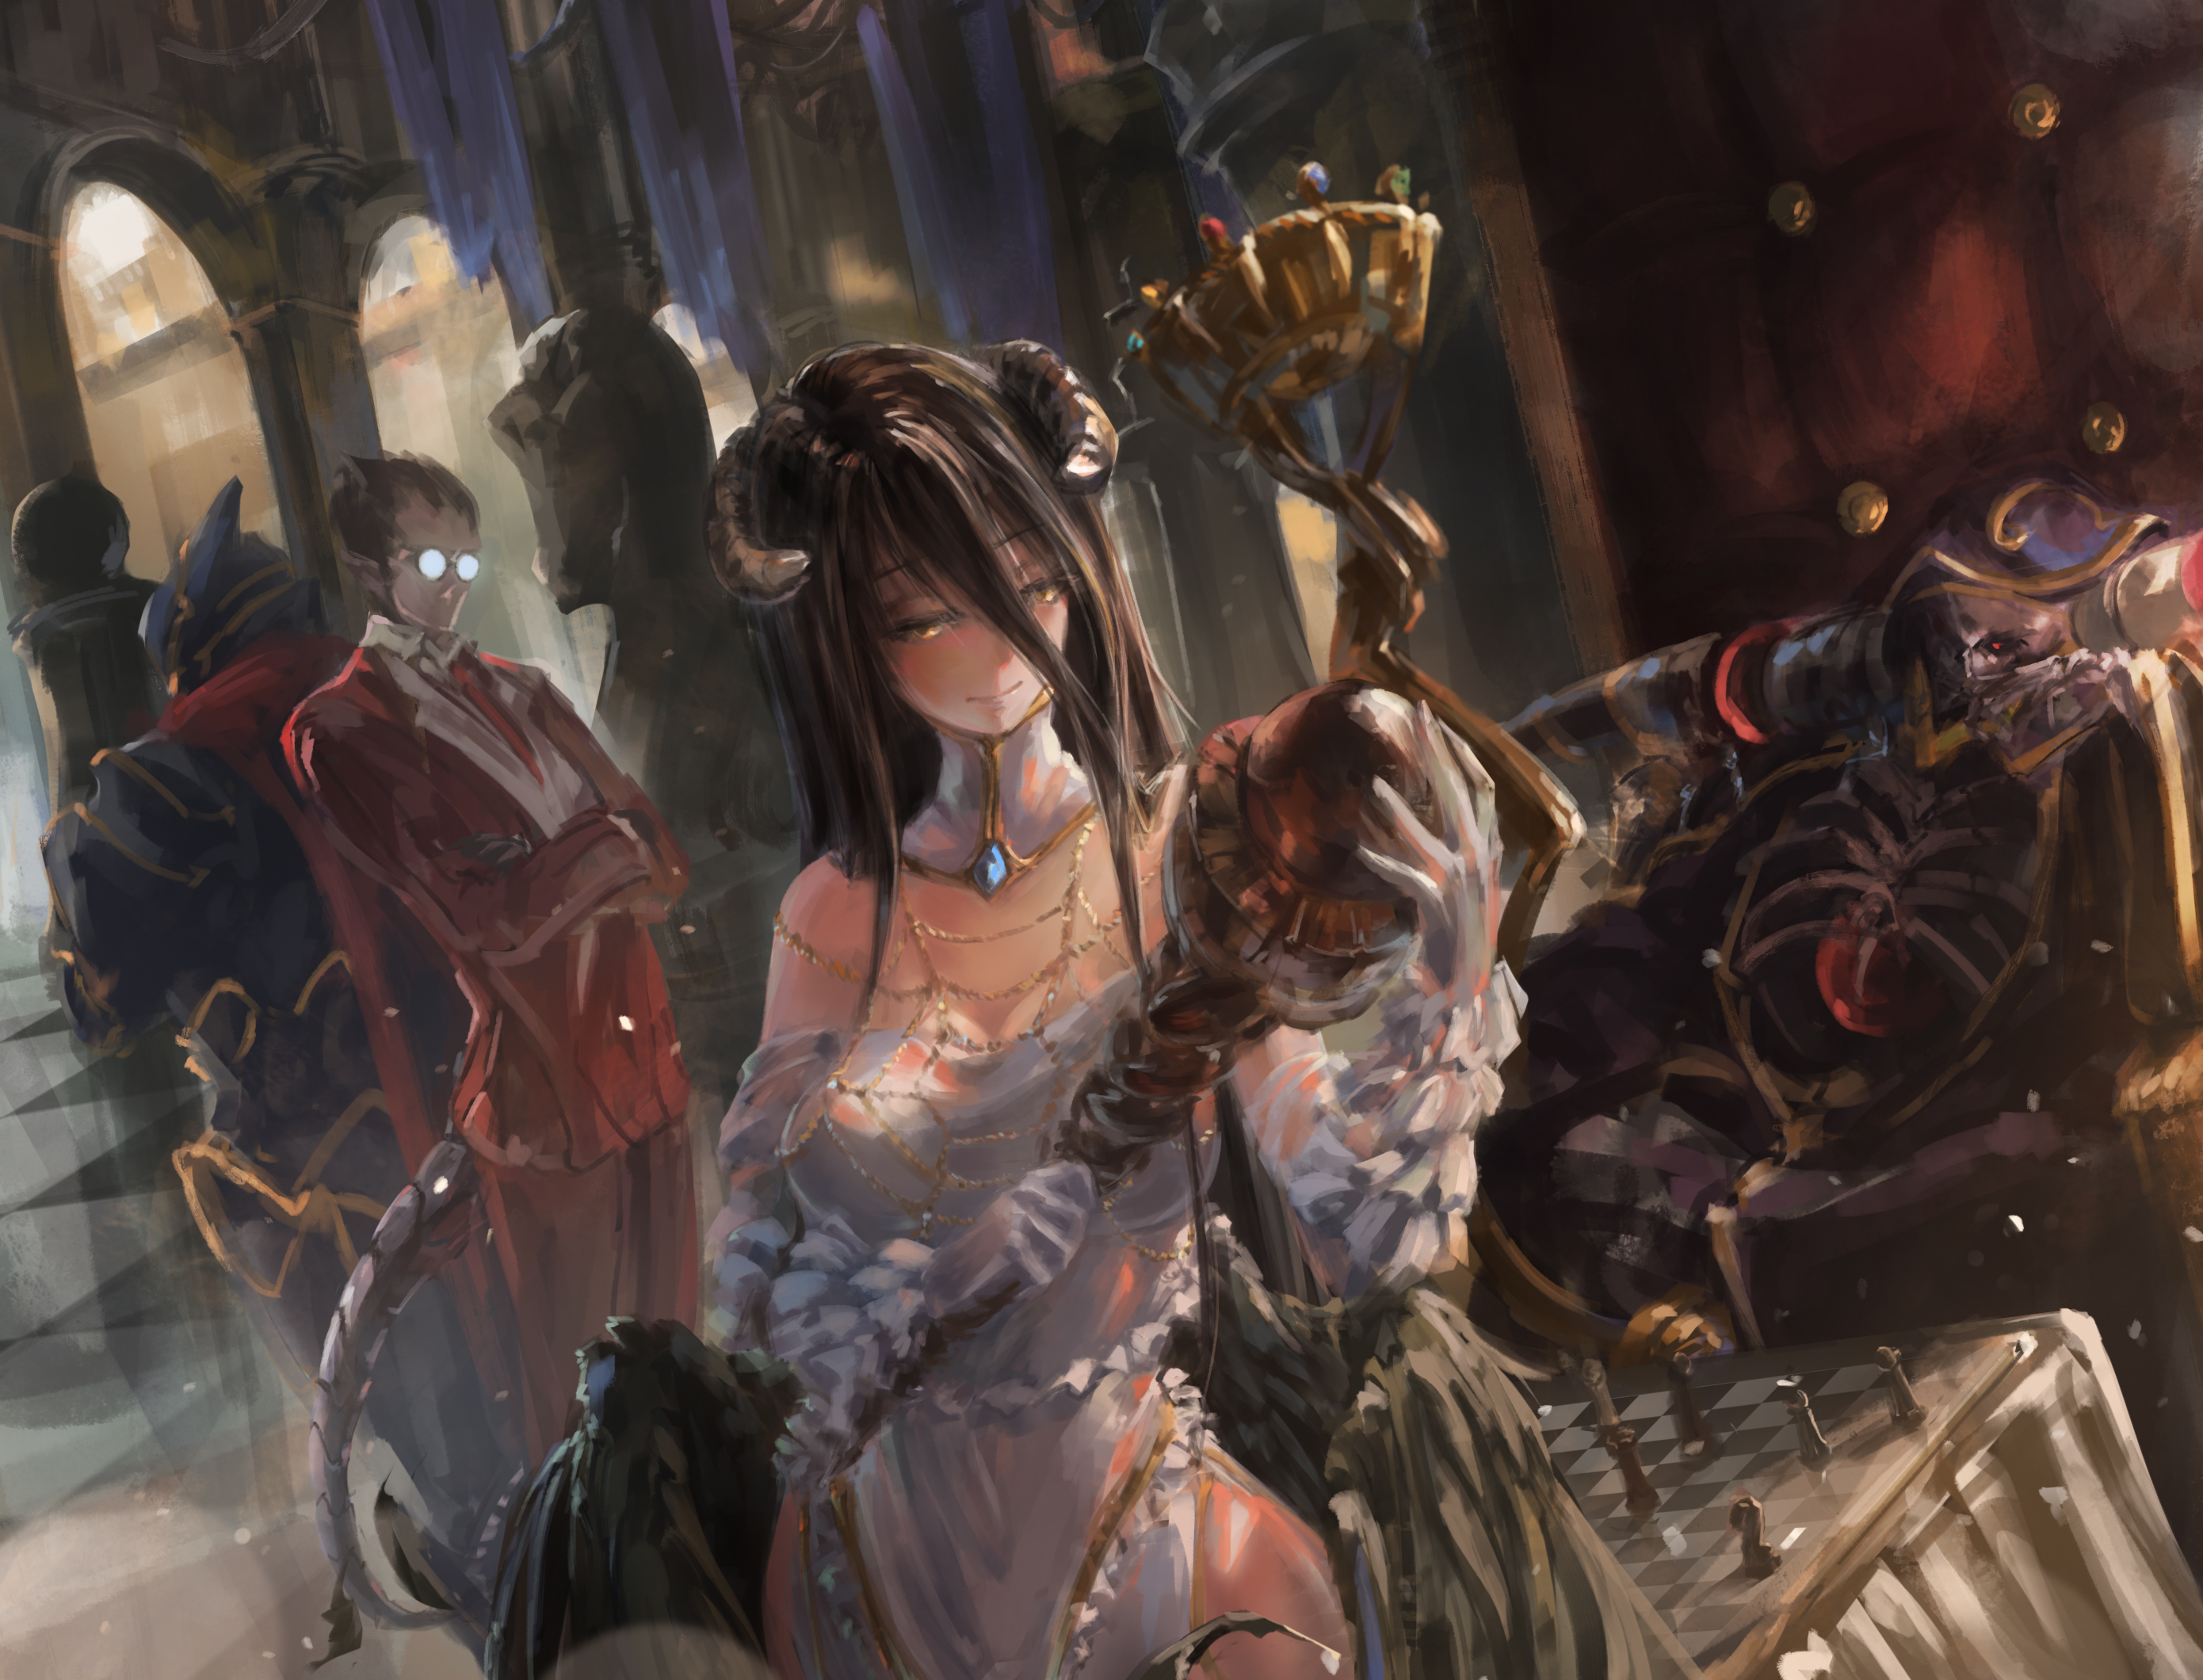 Anime 2780x2120 Ainz Ooal Gown Albedo (OverLord) black hair cleavage white dress long hair Overlord (anime) Demiurge (Overlord) Momonga black wings anime girls anime boys monster girl succubus big boobs wide hips demon girls fantasy armor bare shoulders skeleton 2D no bra smiling demon horns hair in face men with glasses red clothing blushing yellow eyes chess fan art Song Ren